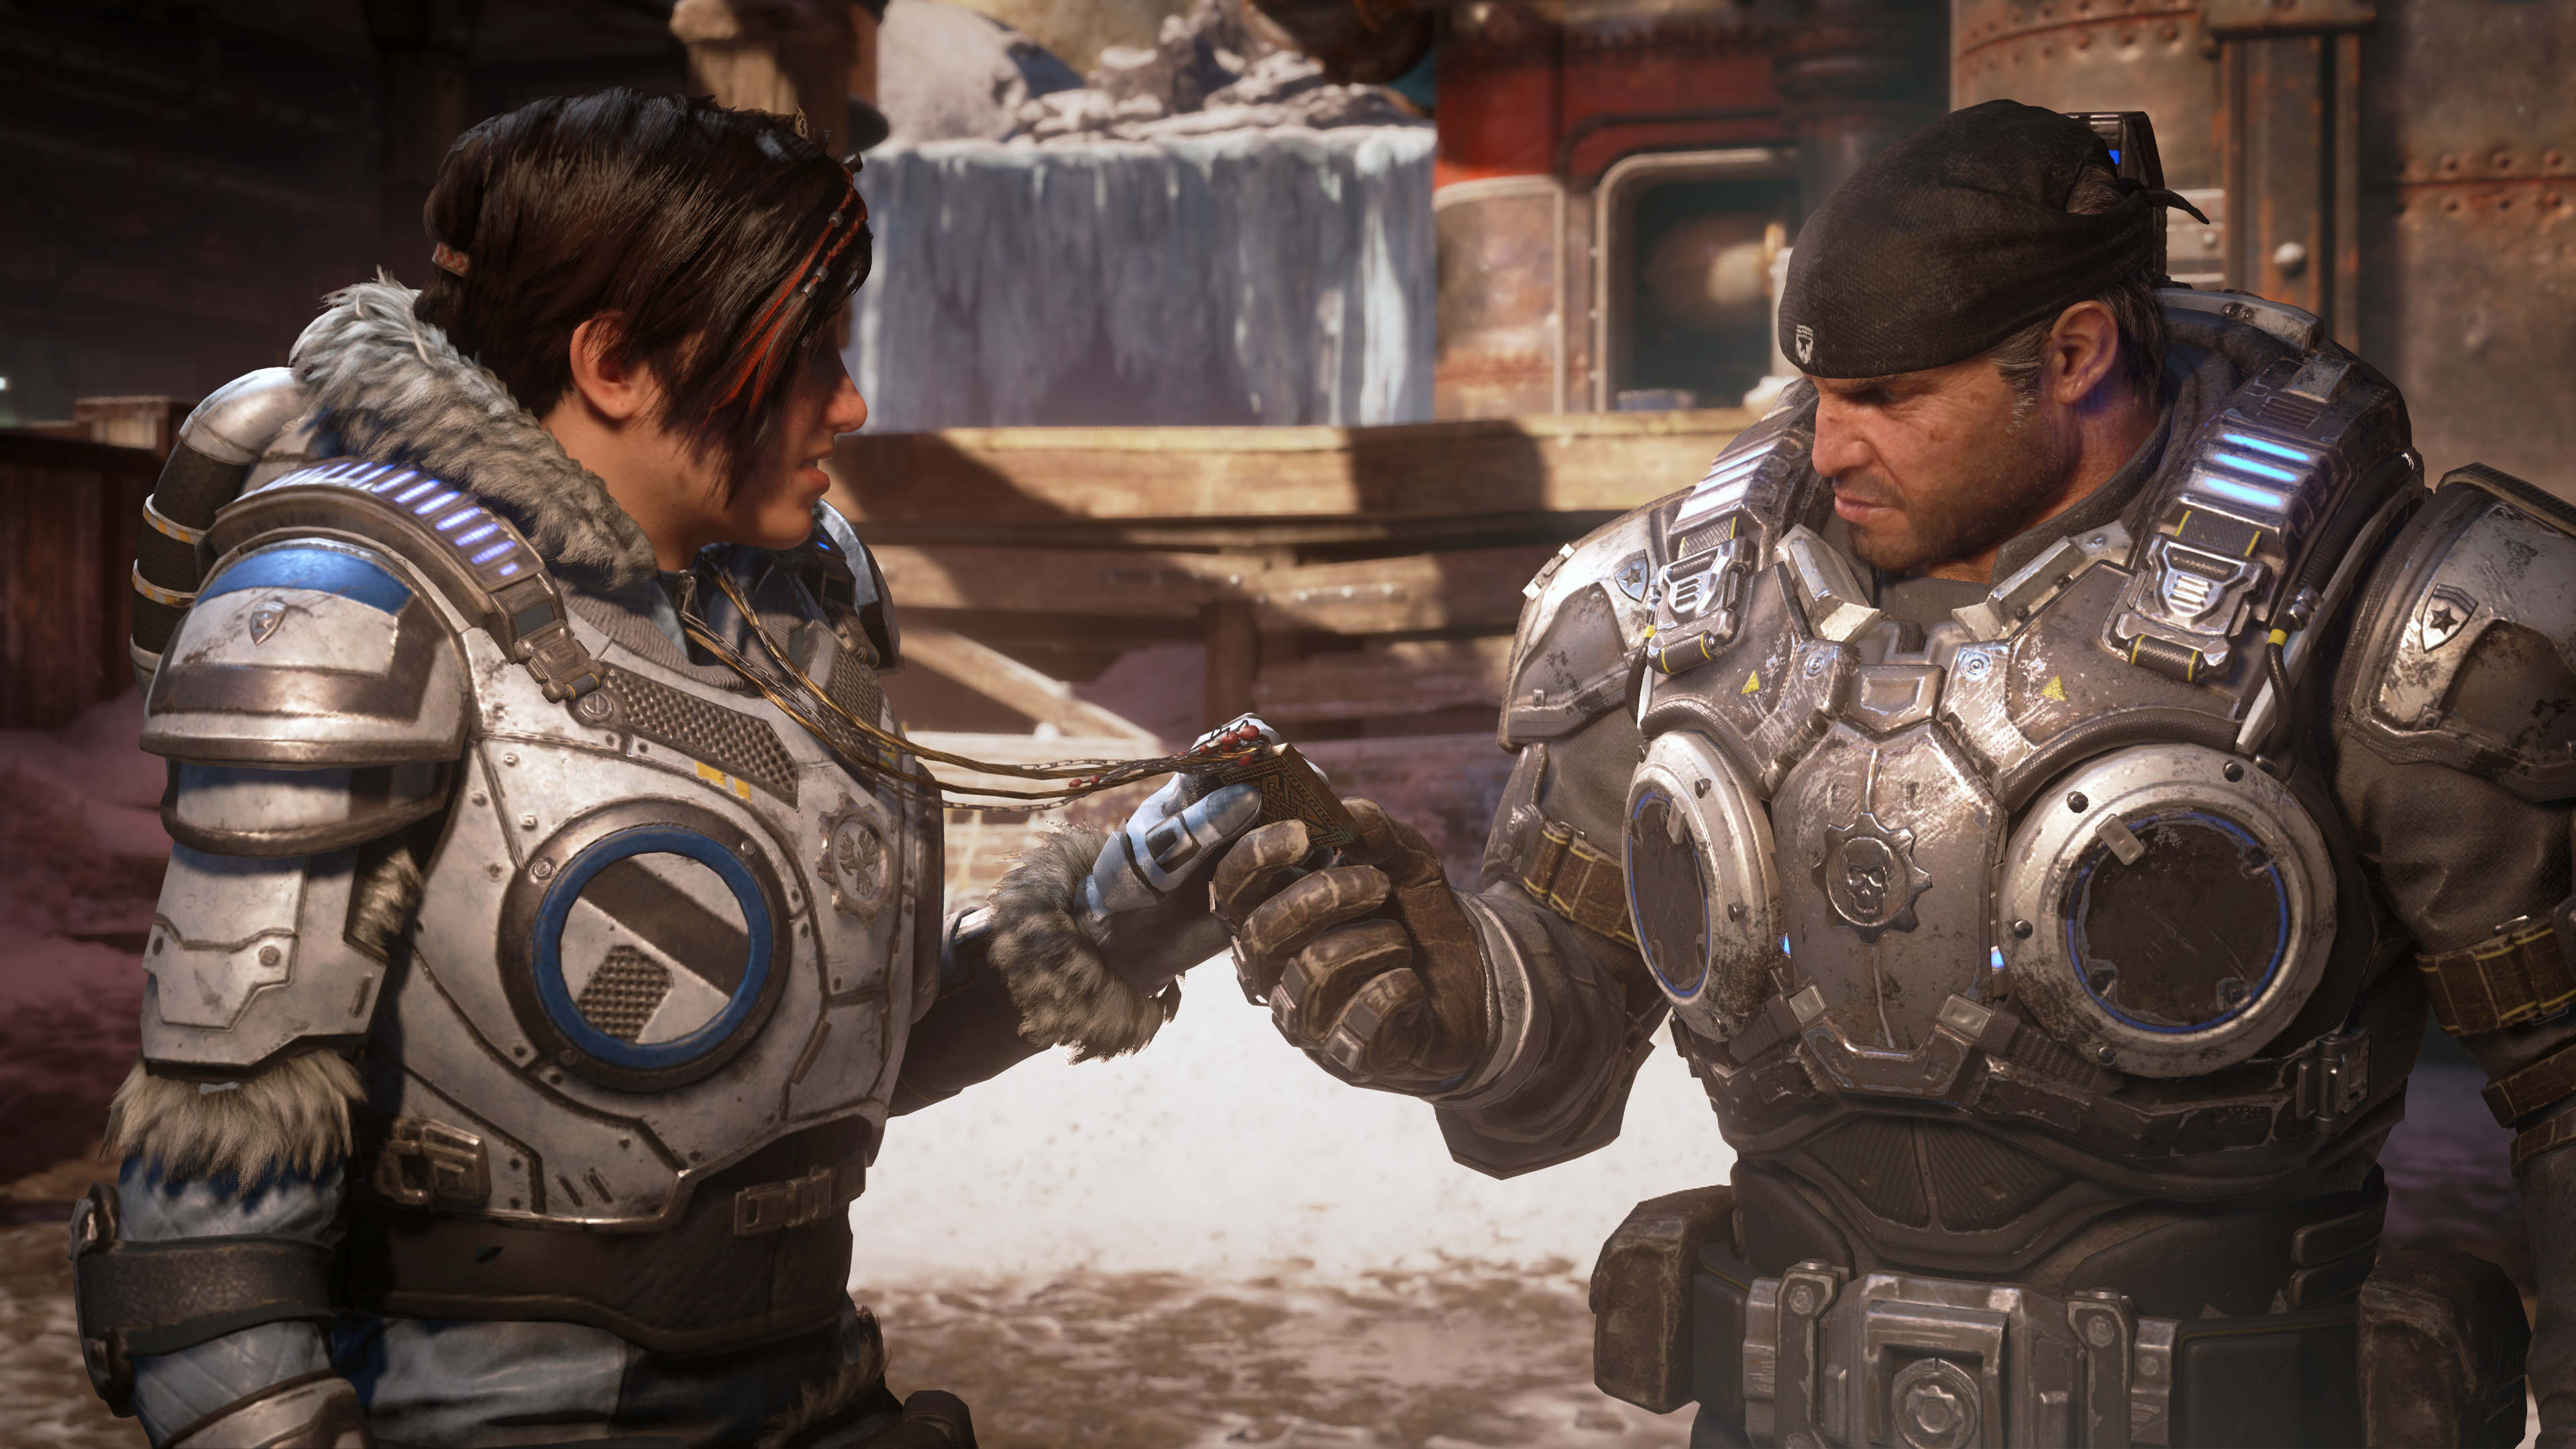 Gears 5 Dev Answers Our Burning Questions About Microtransactions,  Multiplayer, Battle Royale, Loot Boxes, And More - GameSpot